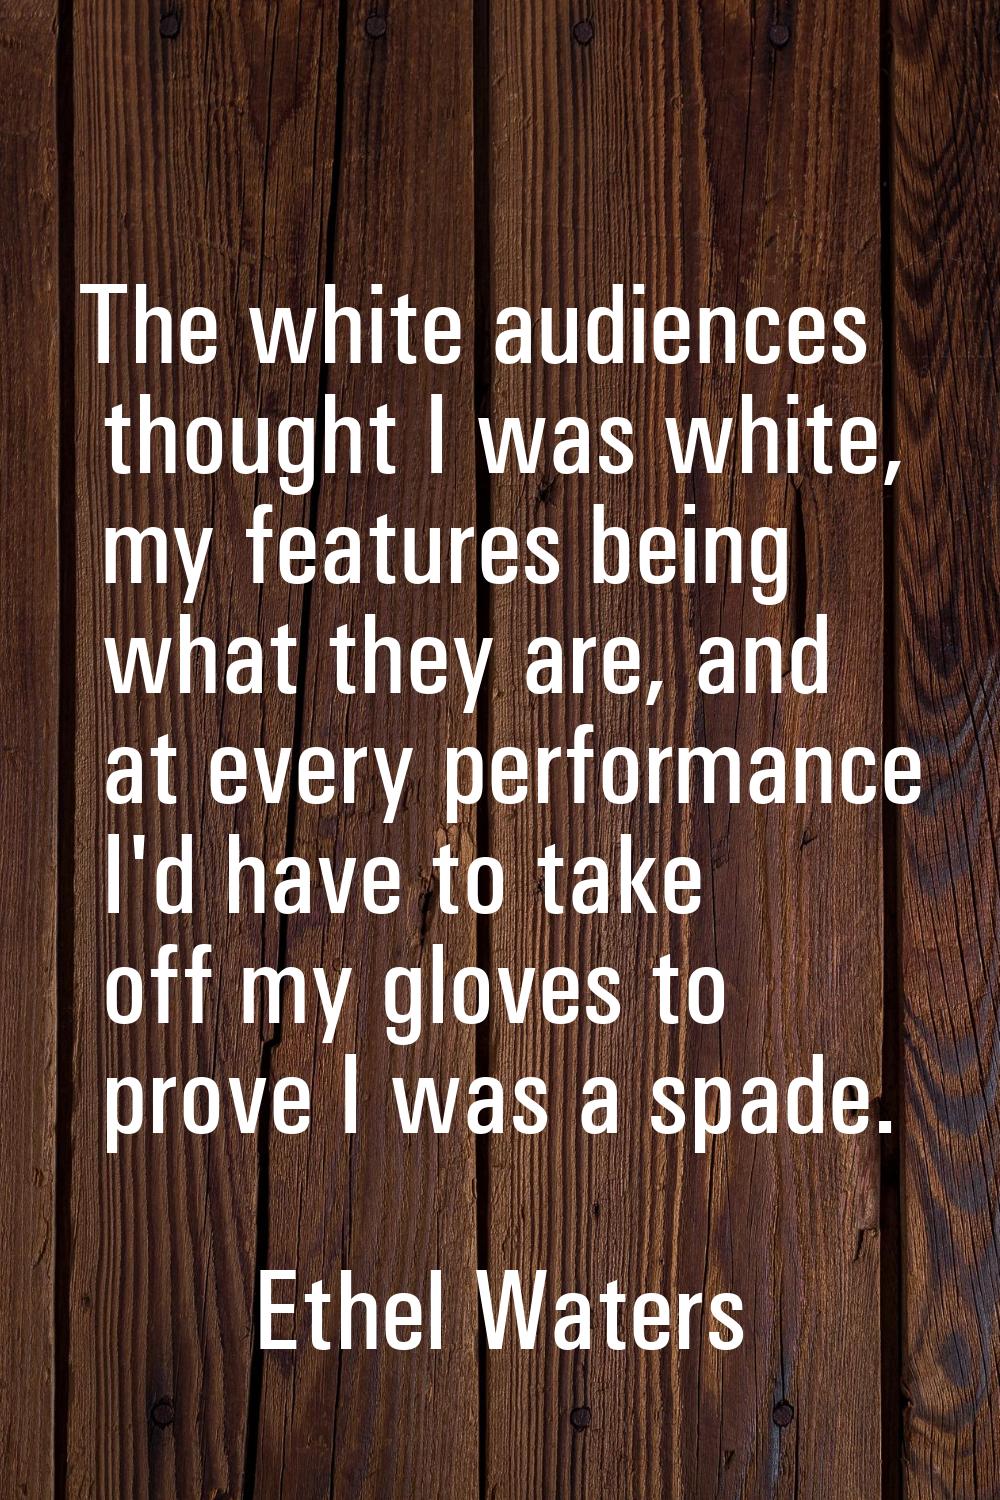 The white audiences thought I was white, my features being what they are, and at every performance 